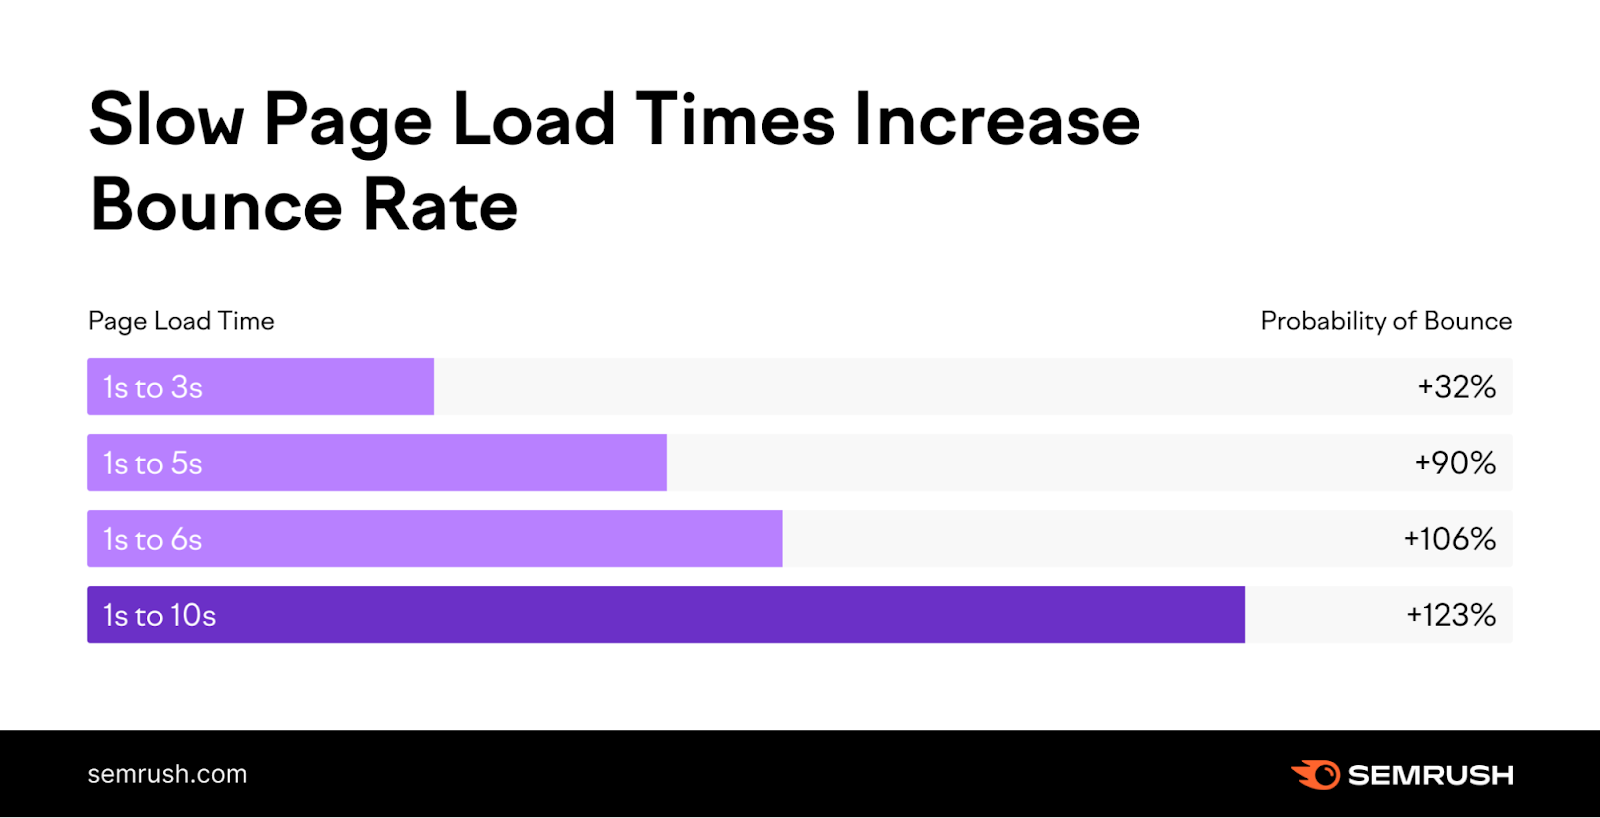 An infographic by Semrush showing that slow page load times increase bounce rate